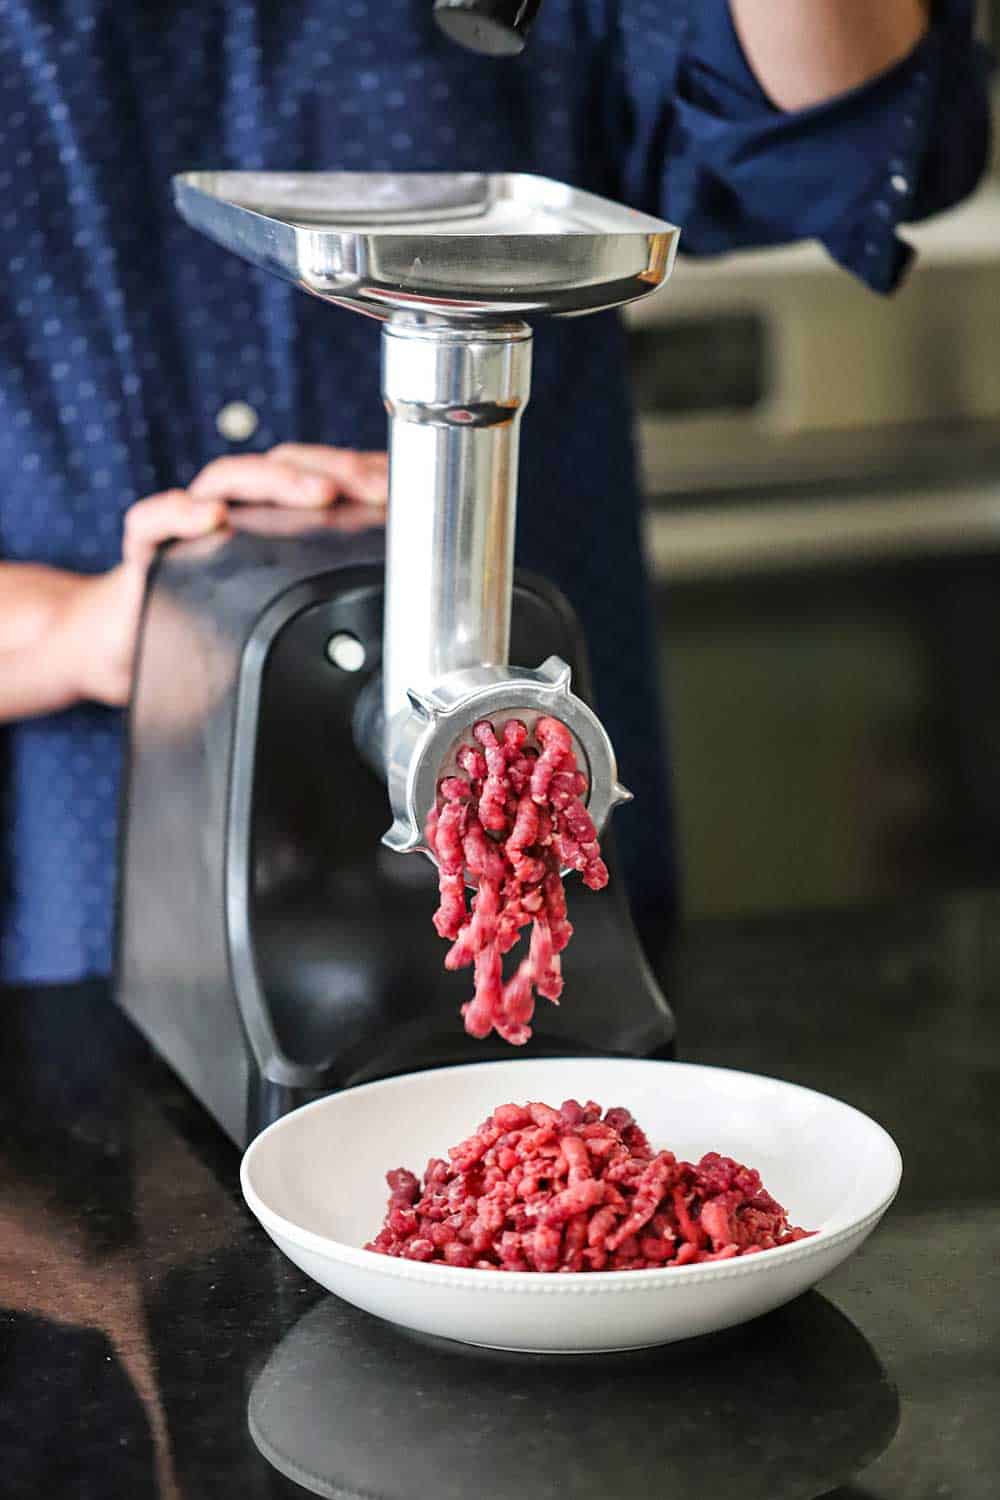 A person standing behind a free-standing meat grinder with ground beef coming out of the grinder and falling into a white bowl on the counter.